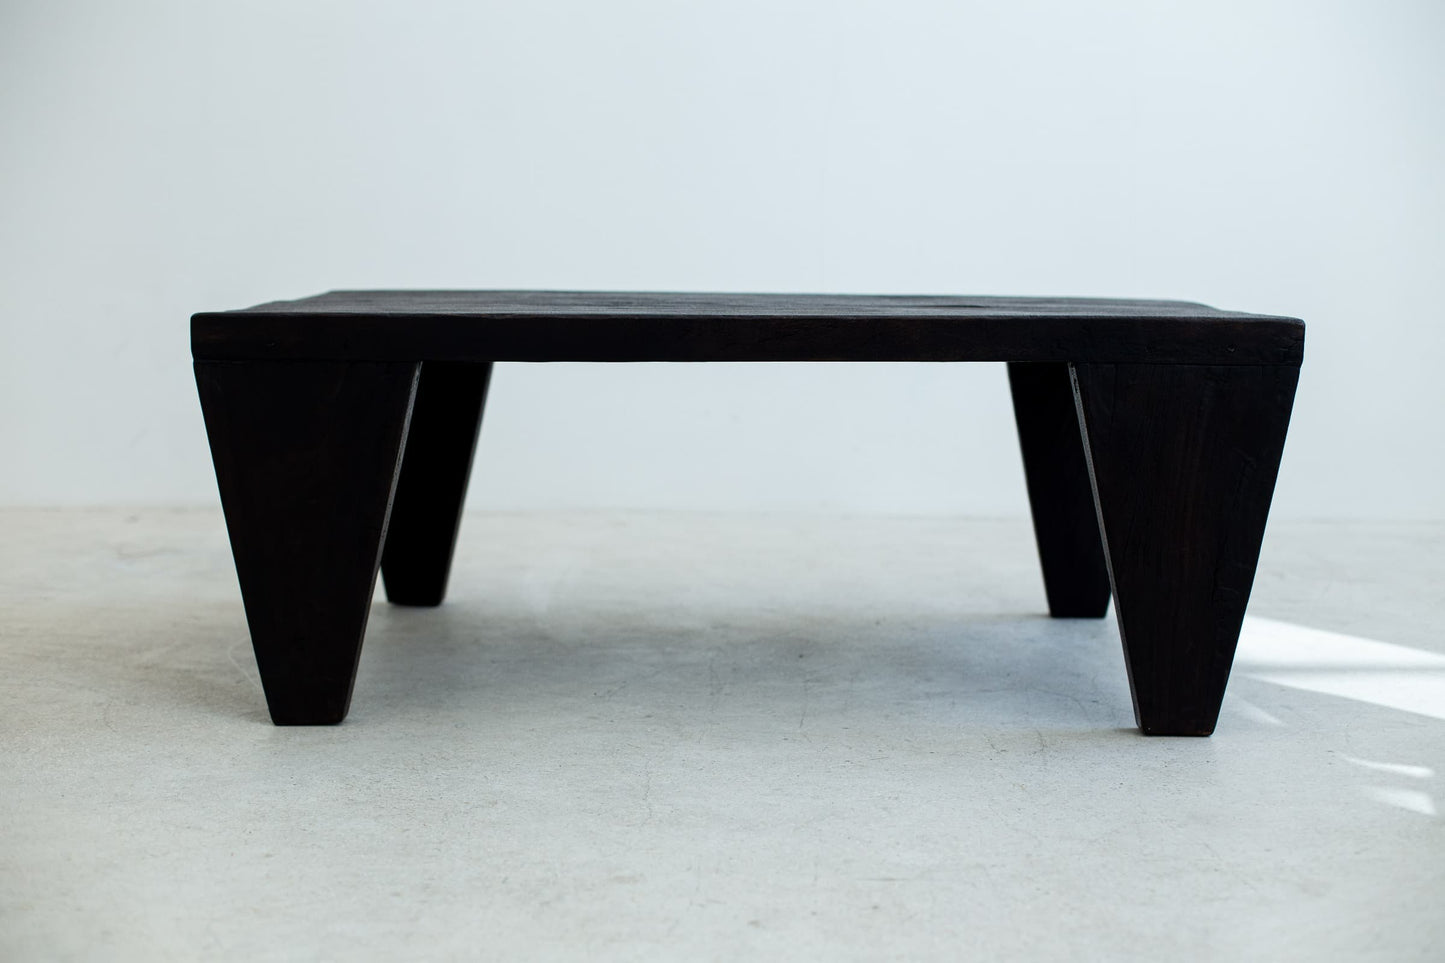 COPE COFFEE TABLE